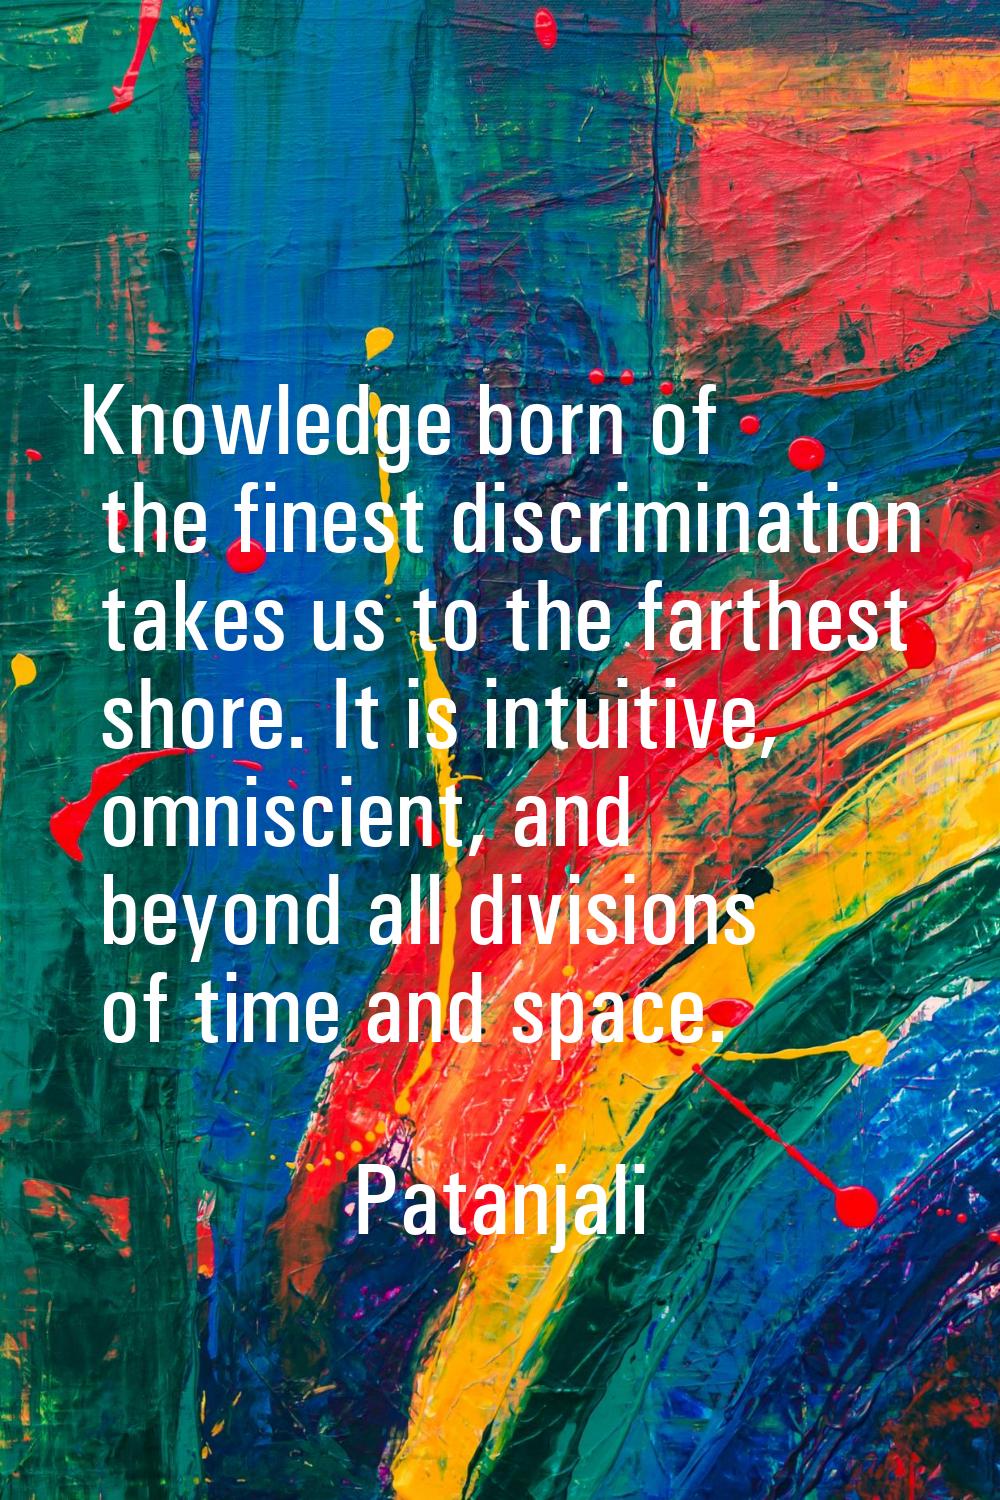 Knowledge born of the finest discrimination takes us to the farthest shore. It is intuitive, omnisc